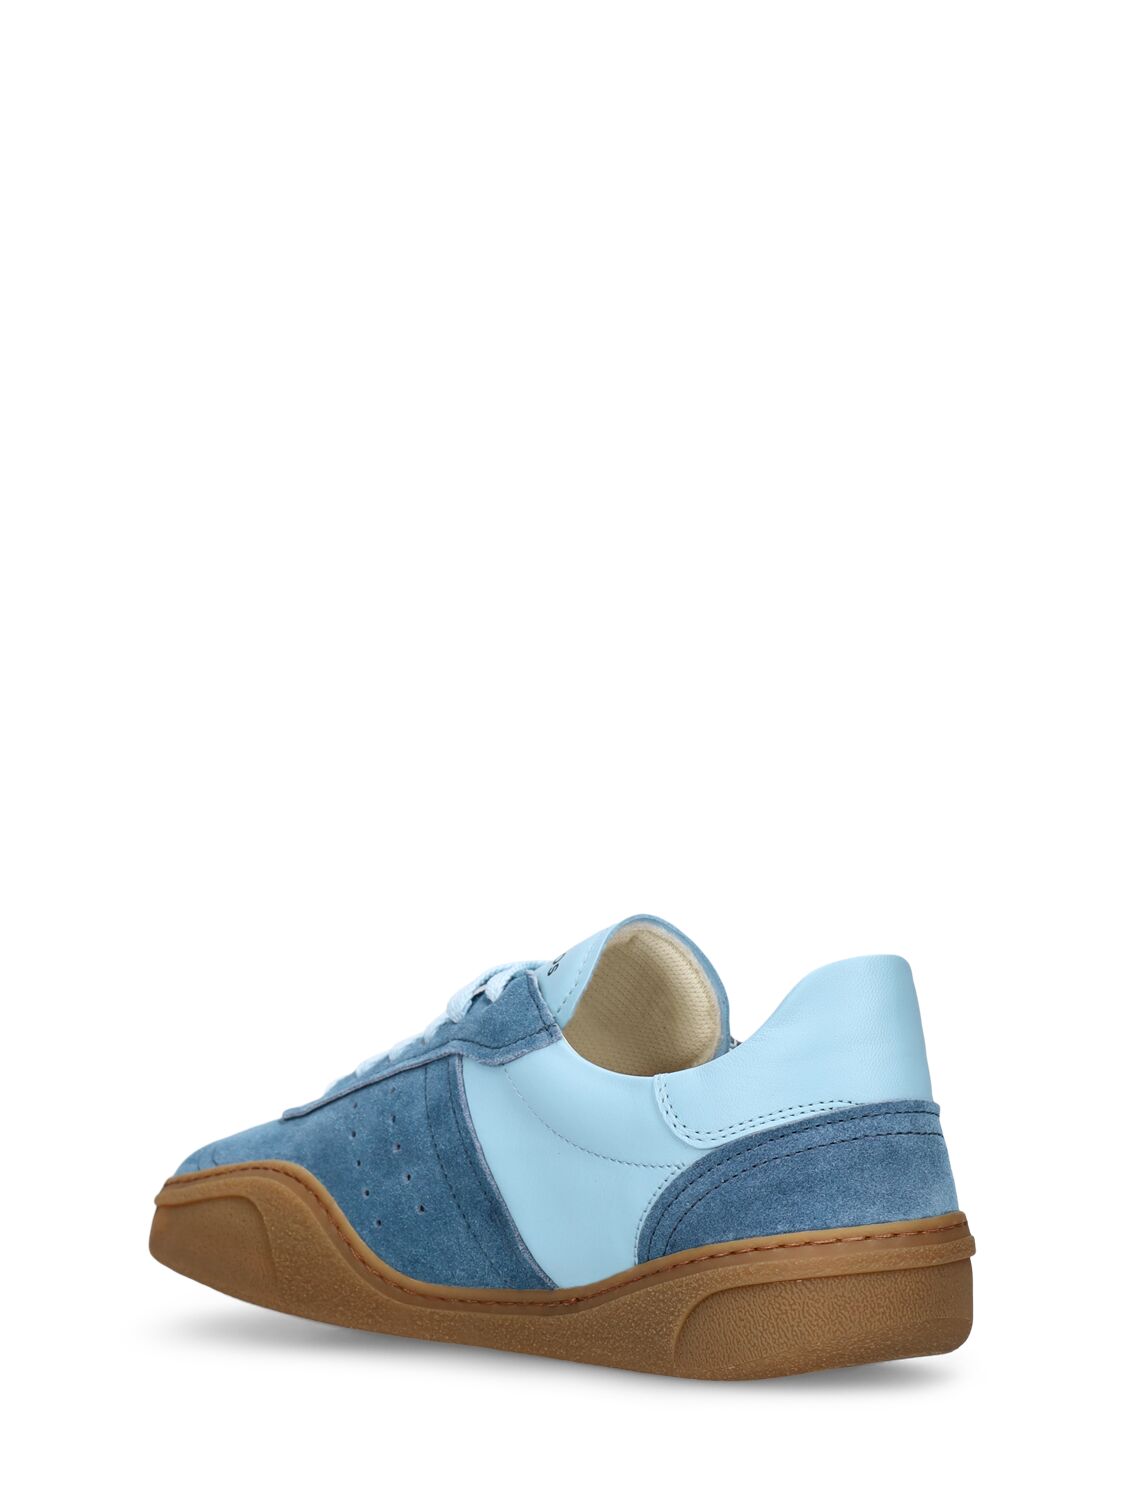 Shop Acne Studios Bars Leather Sneakers In Light Blue,tan